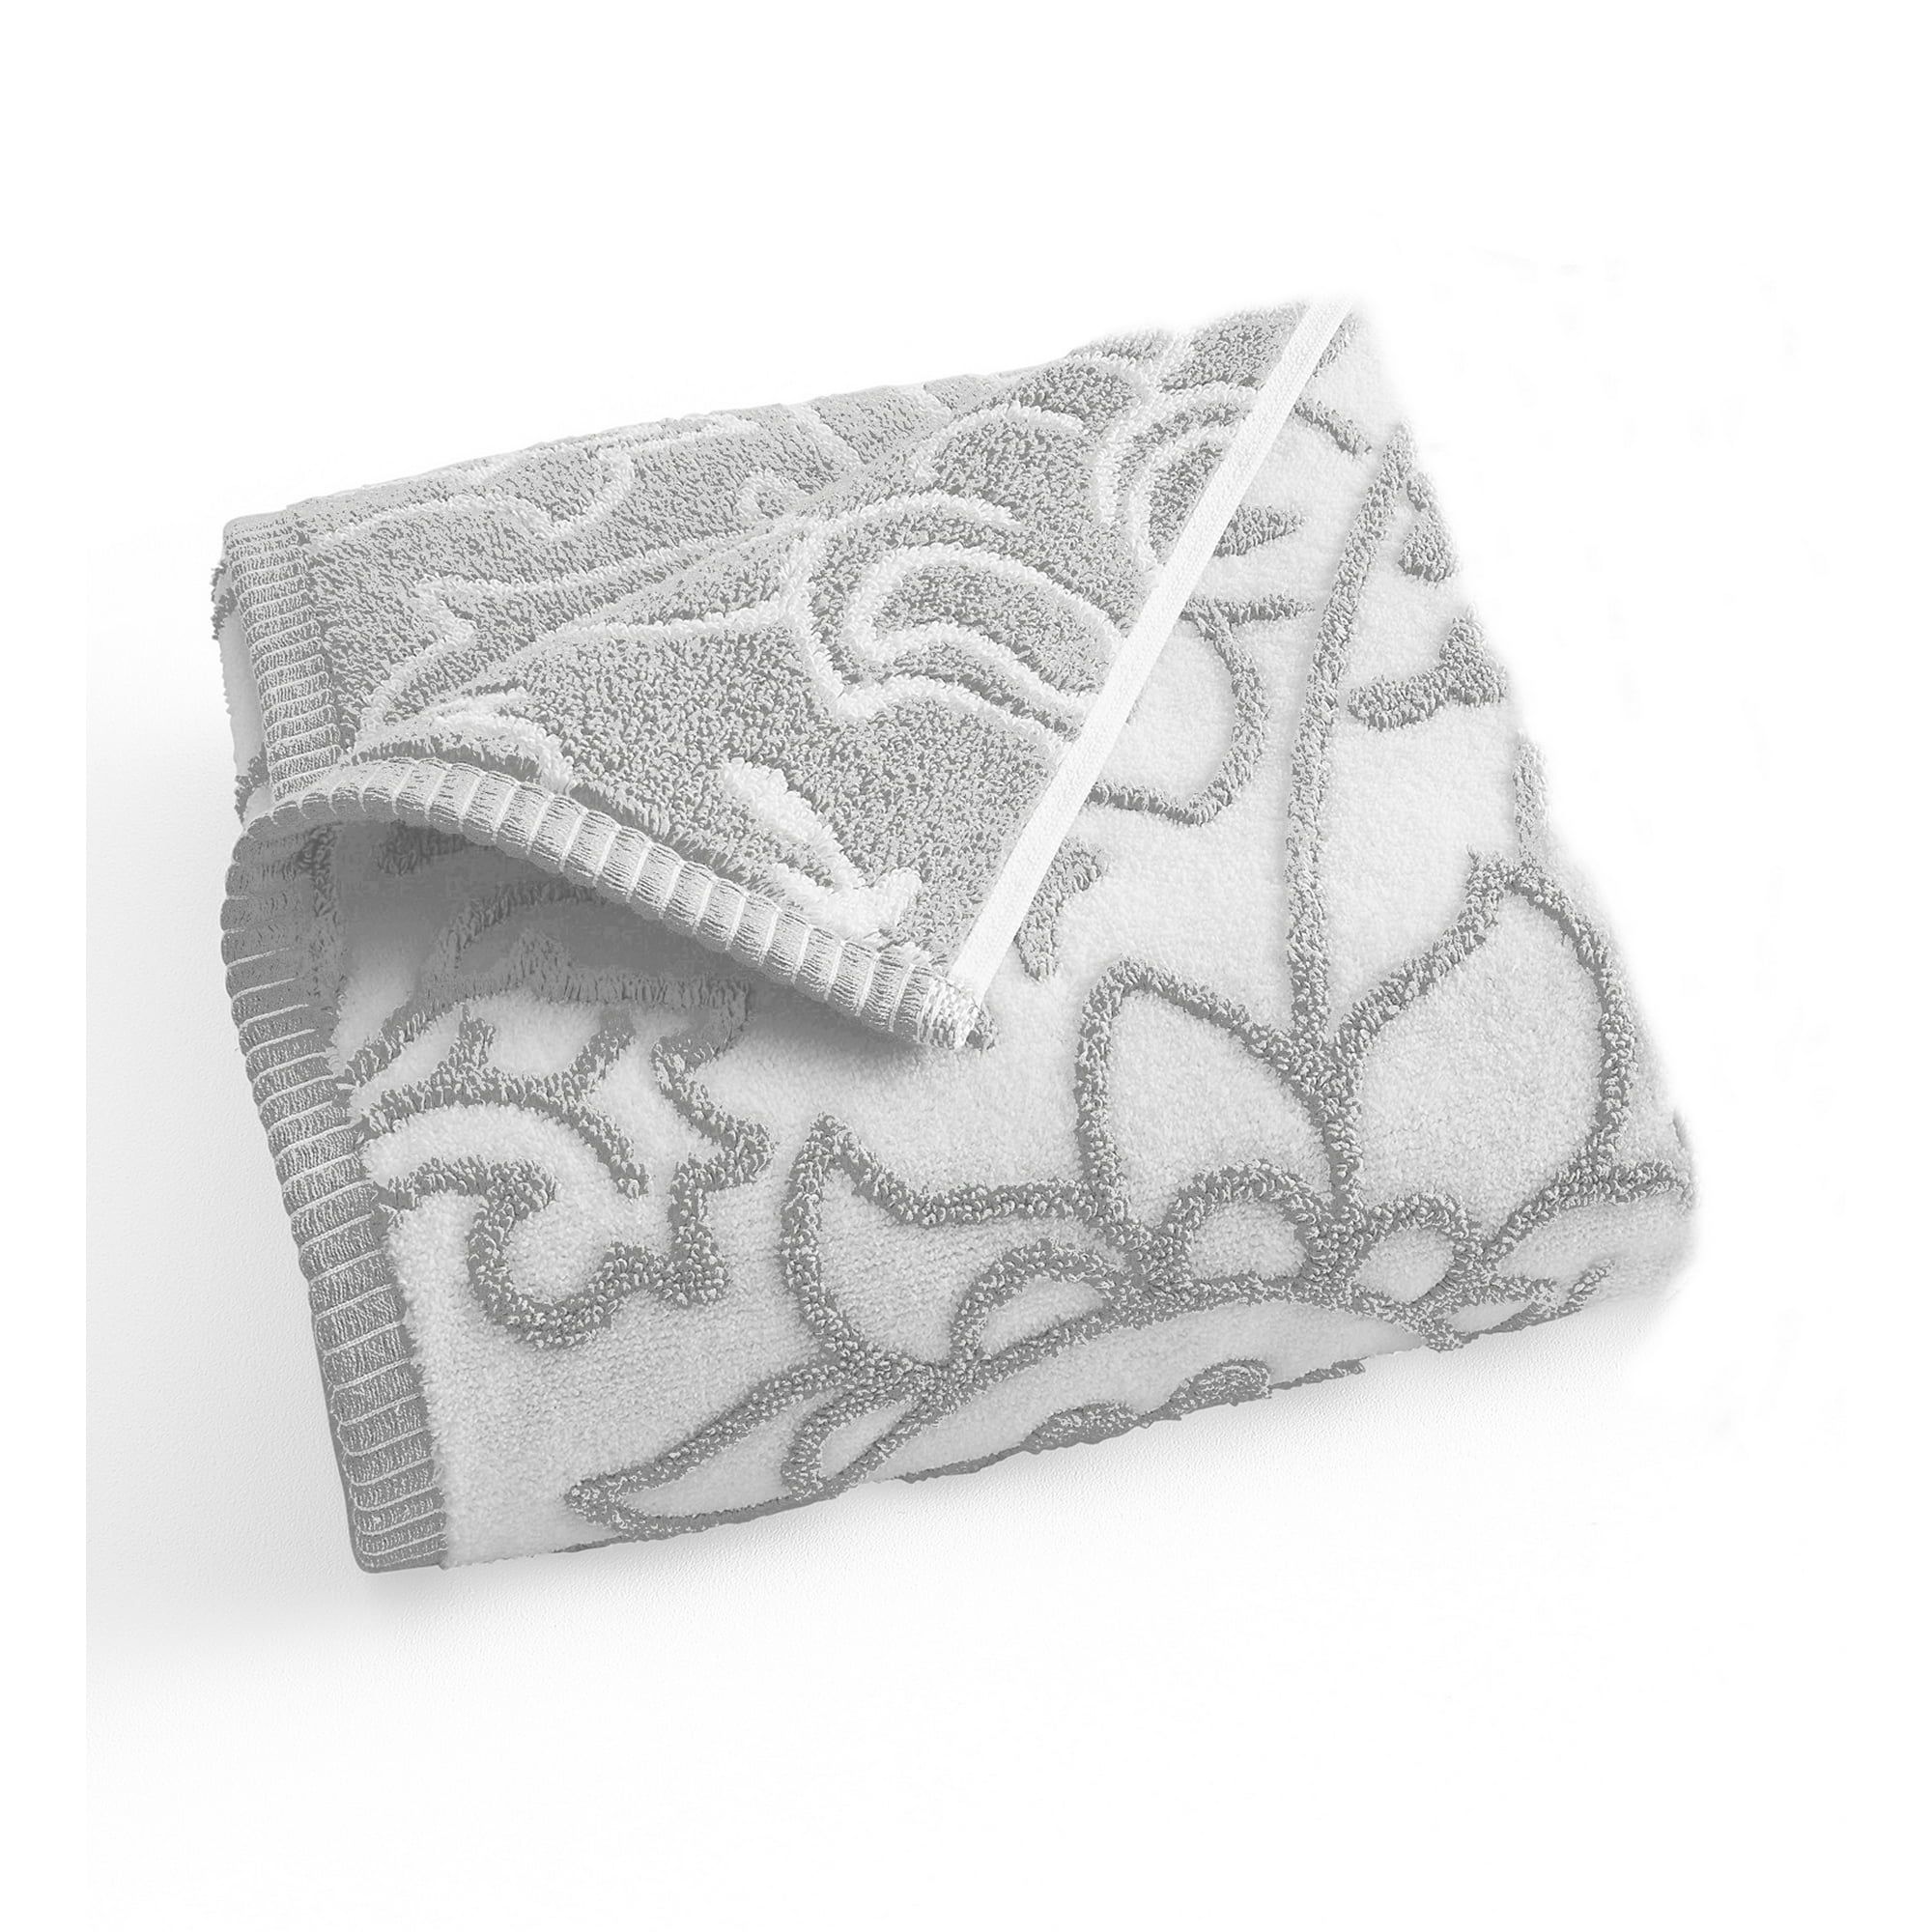 Better Homes & Gardens Thick and Plush Sheared Paisley Bath Towel, Soft Silver | Walmart (US)